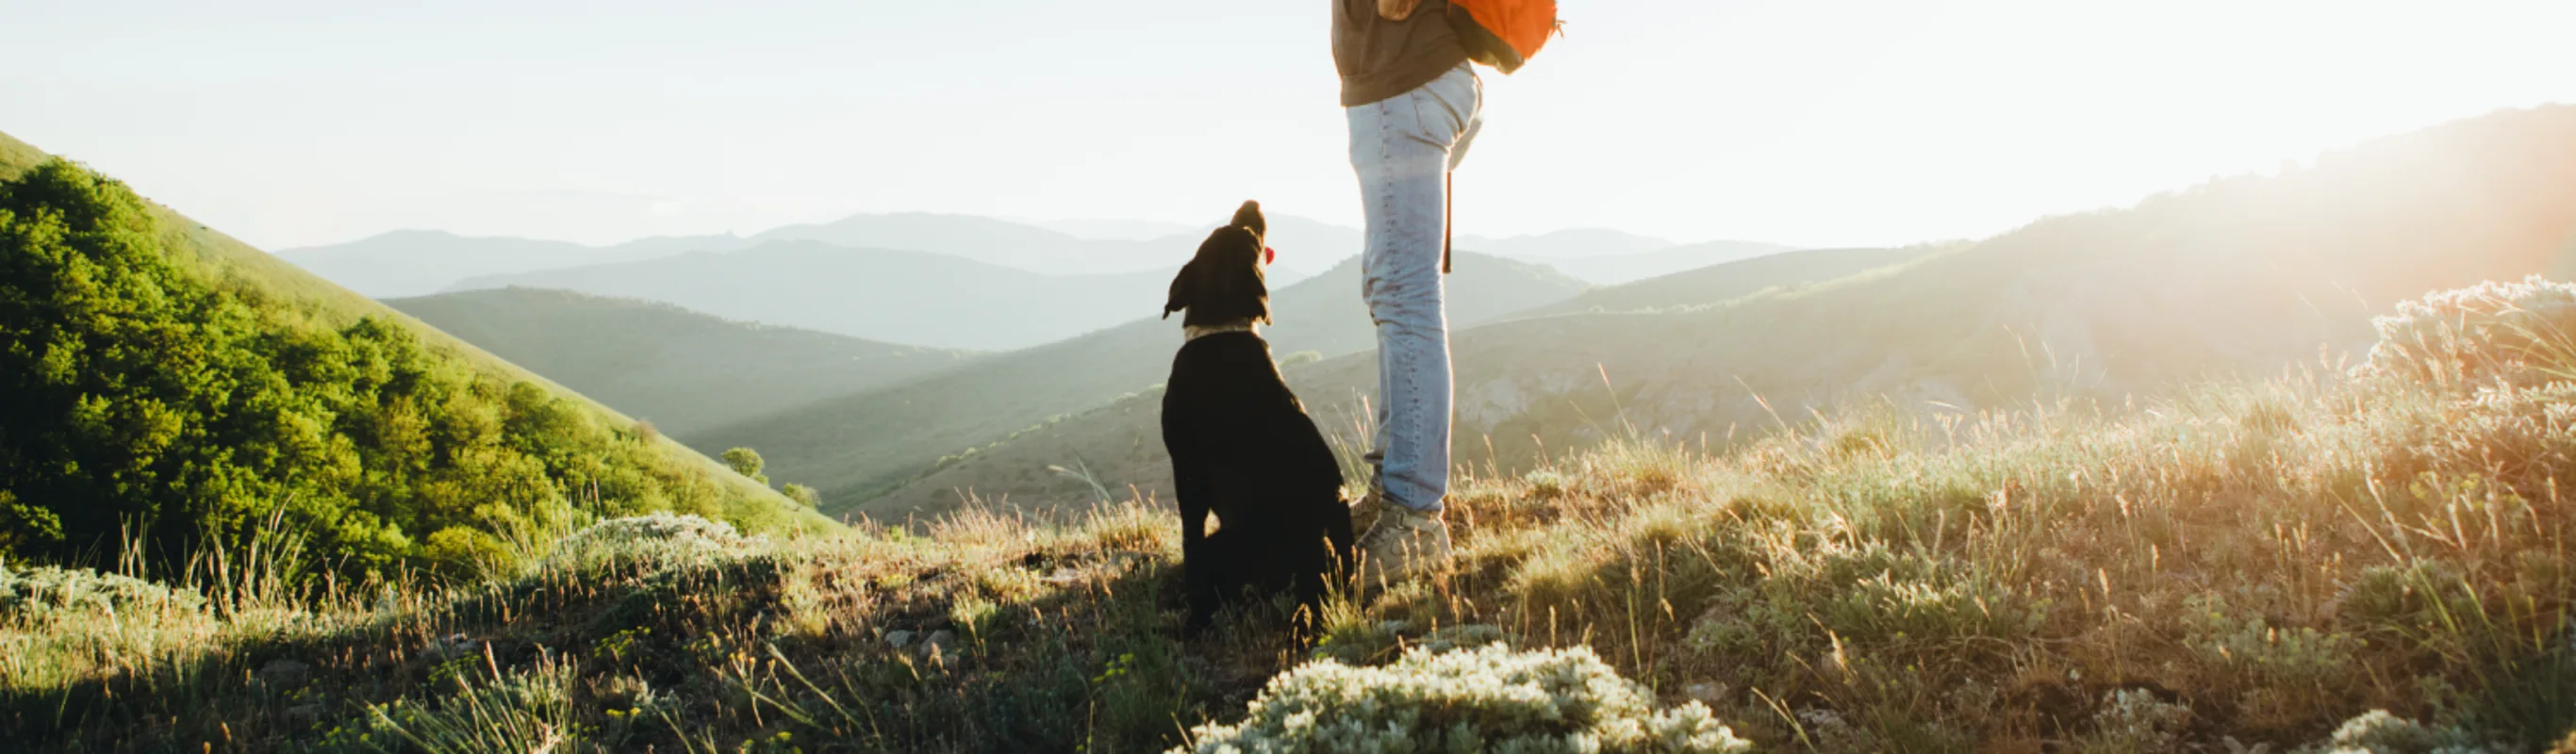 Dog looking up at its owner standing above him with a nature scene surrounding